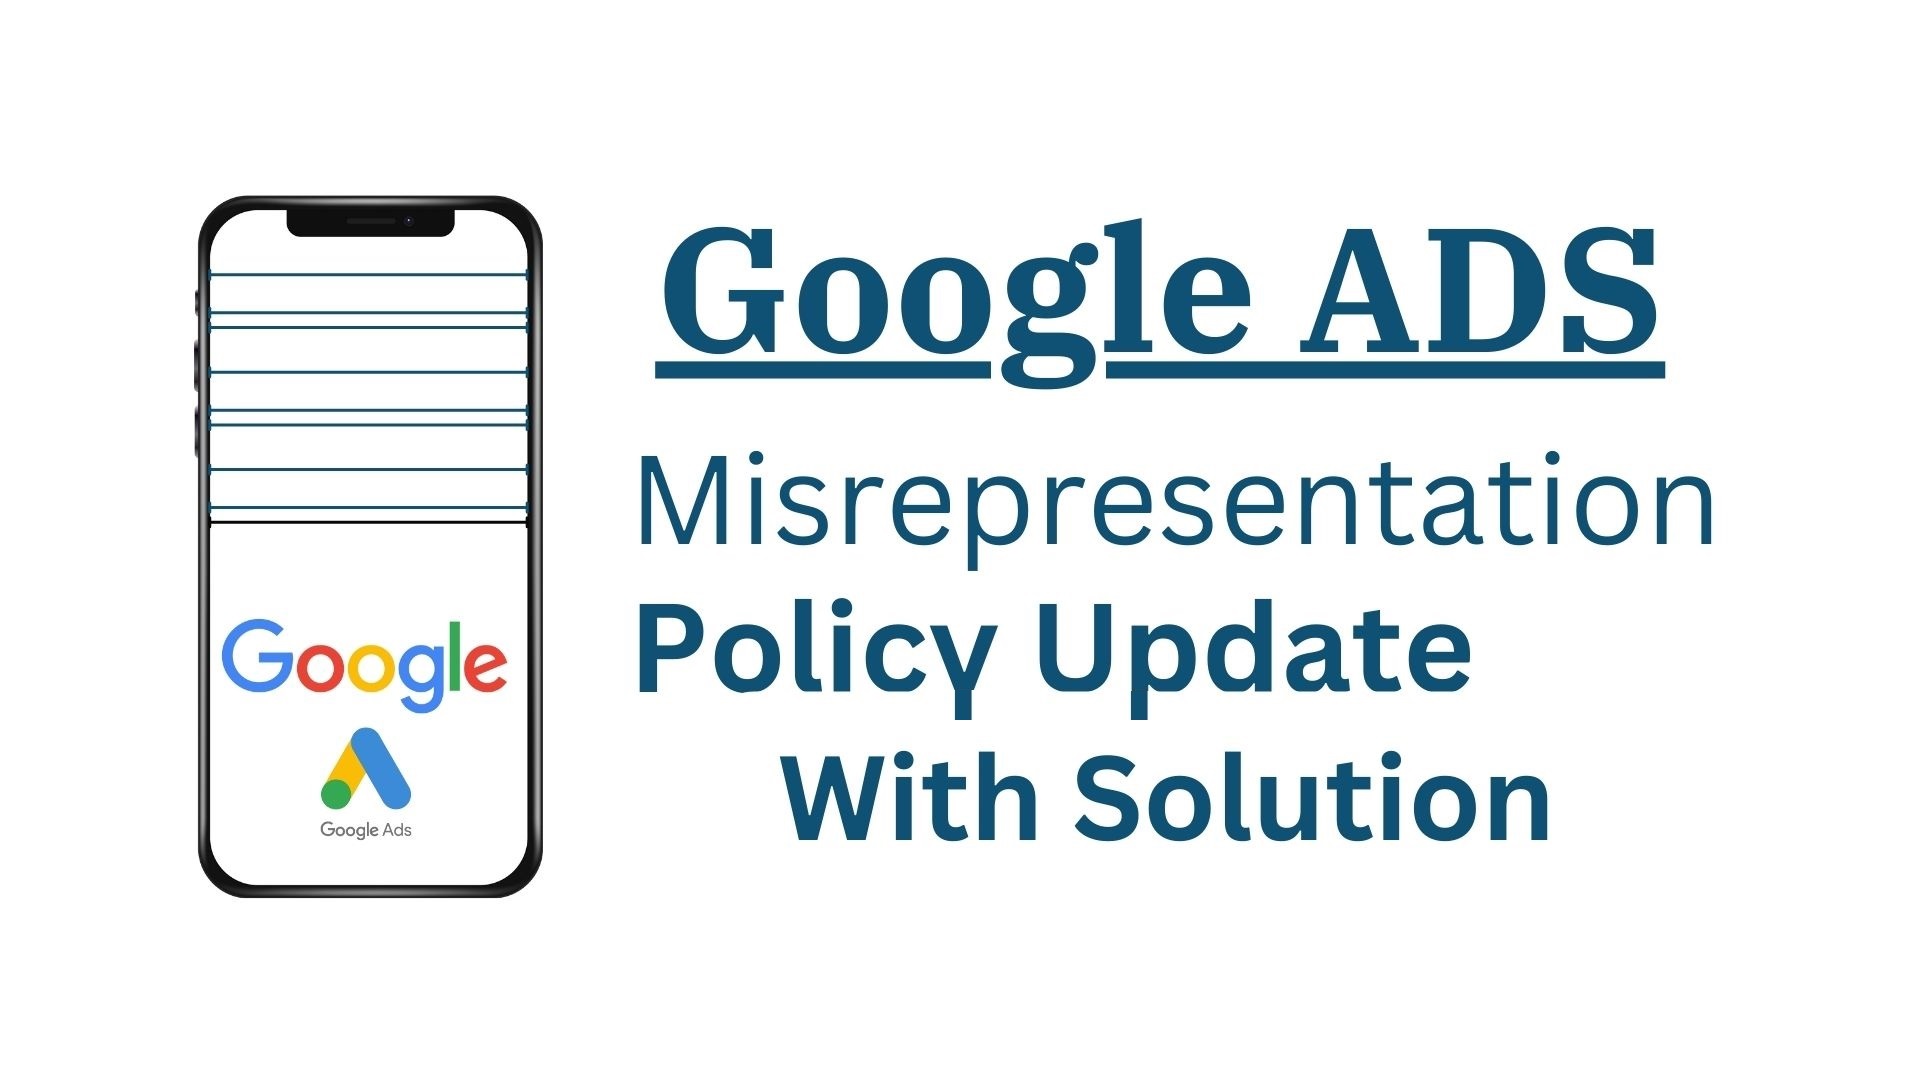 What is Google's Misrepresentation policy update? Get Solution